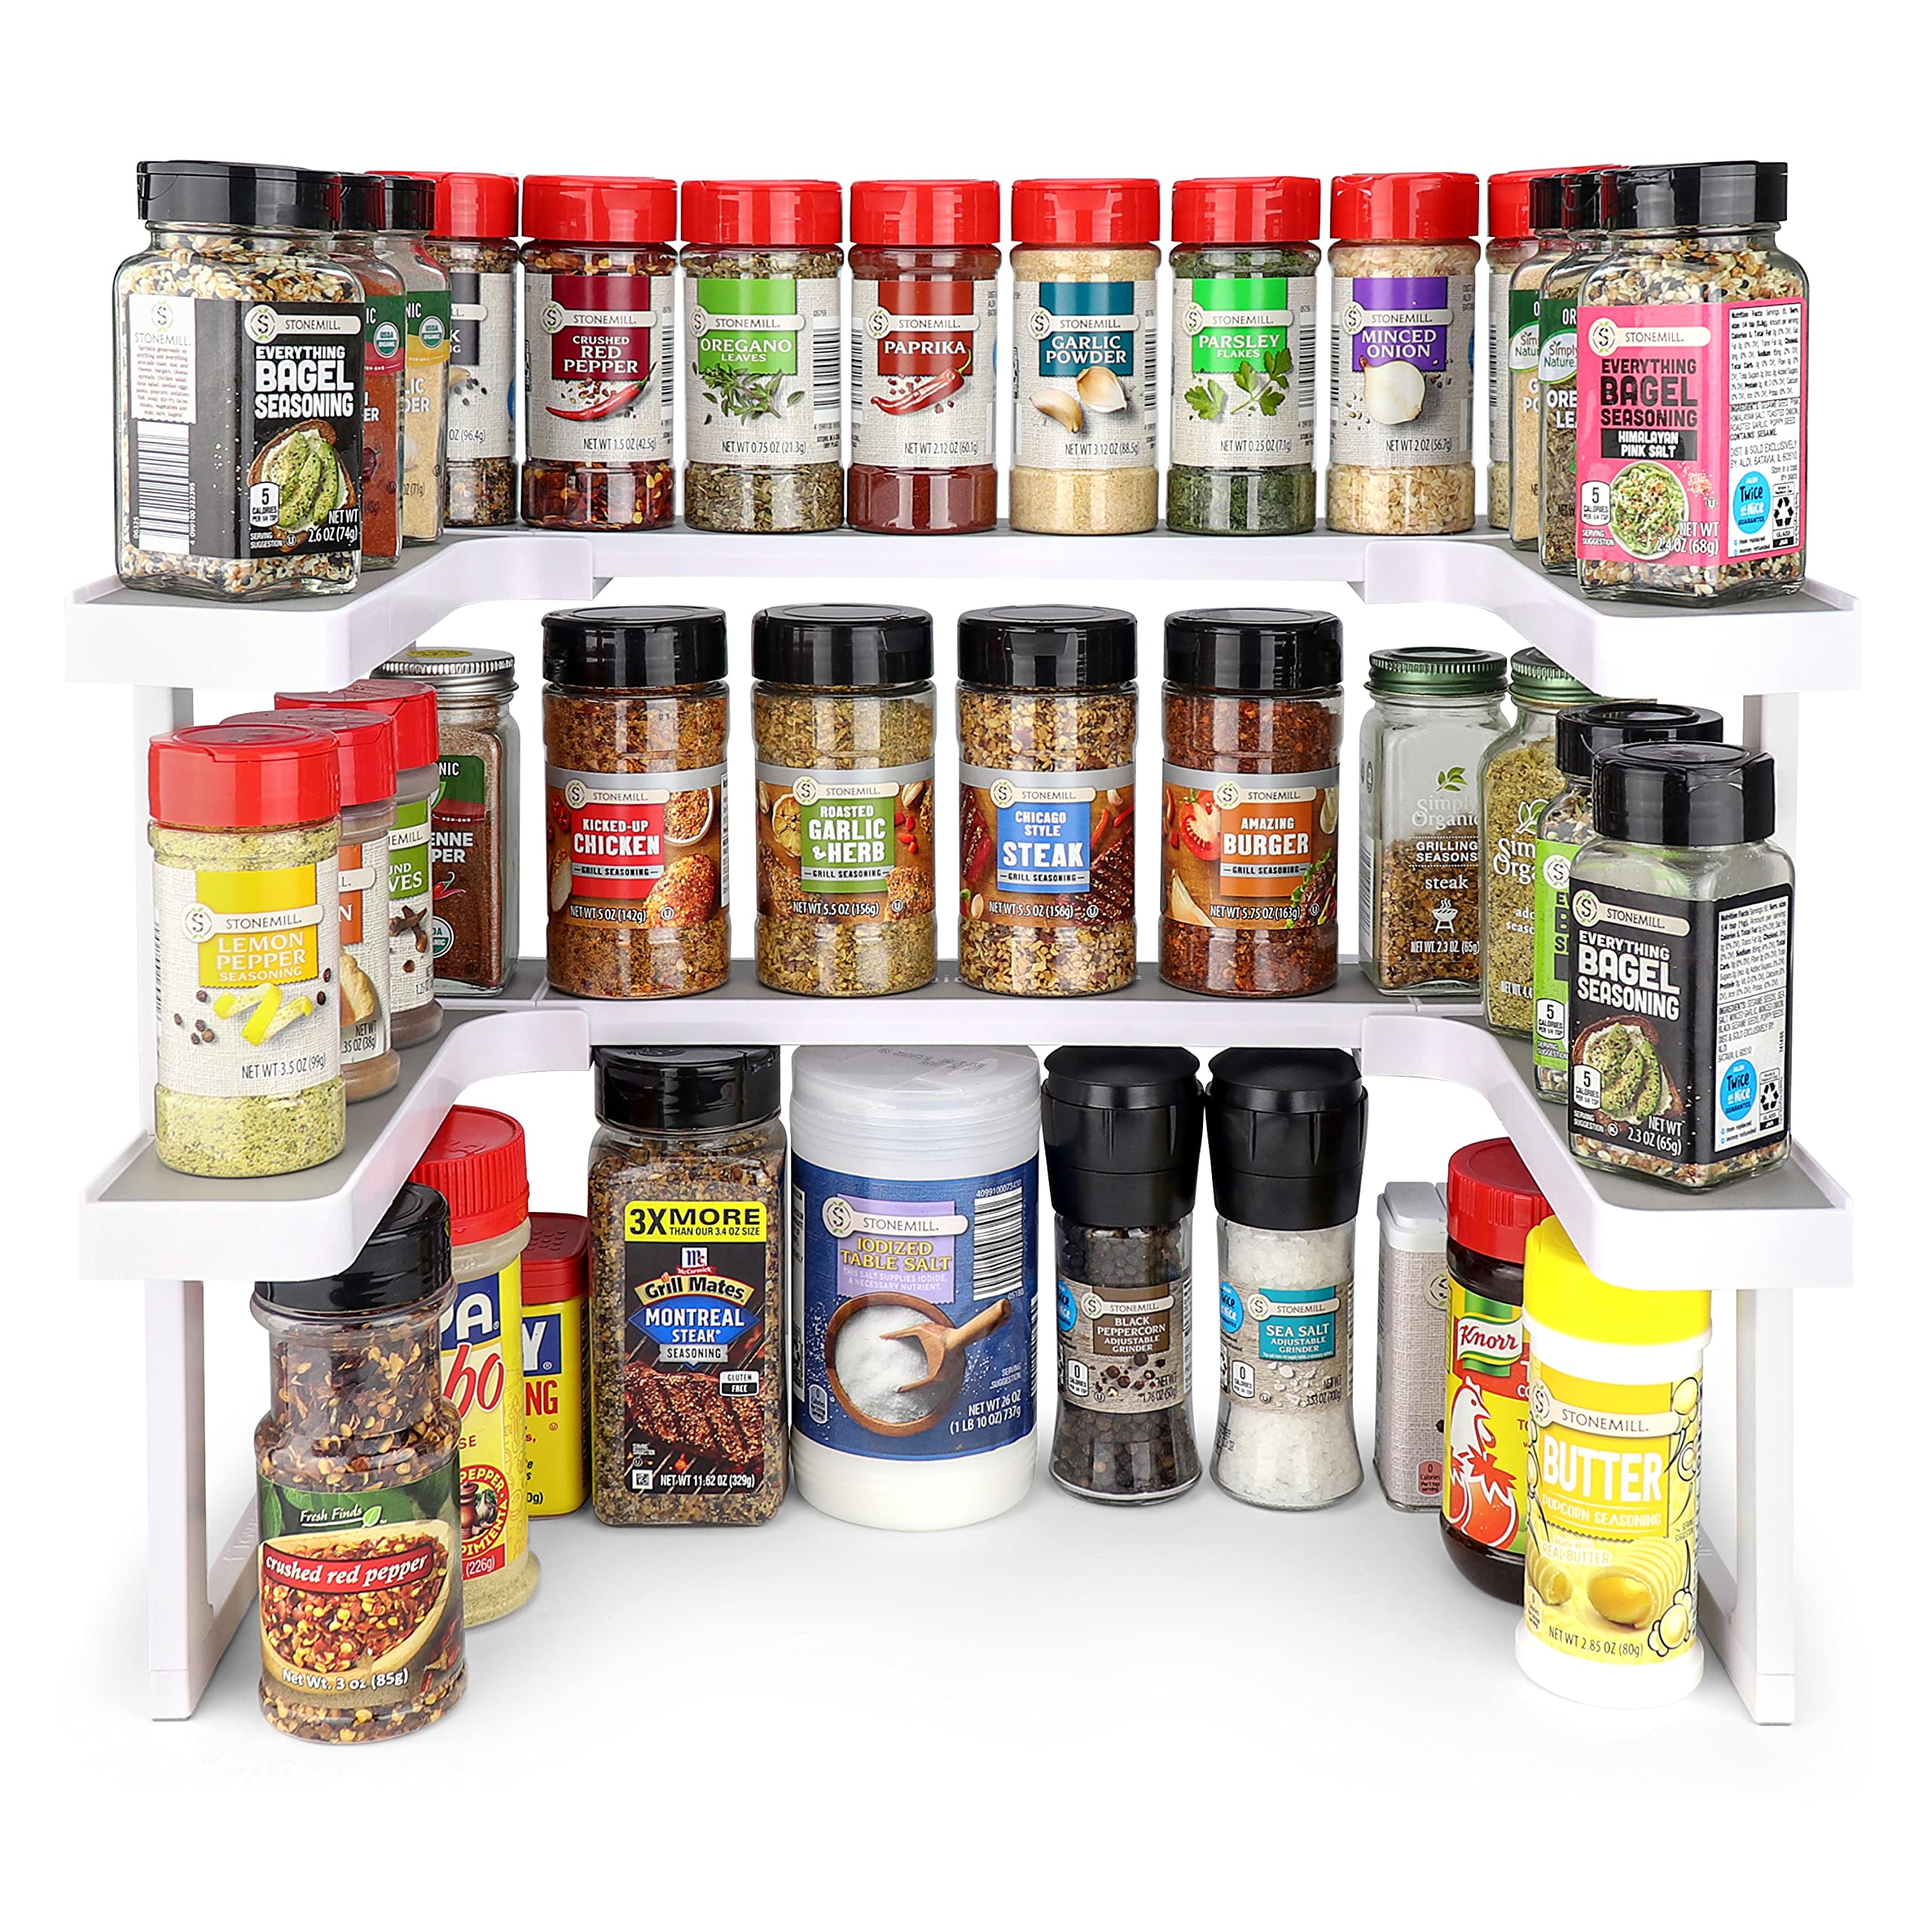 Spicy Shelf Deluxe - Expandable Spice Rack and Stackable Cabinet & Pantry Organizer (1 Set of 2 shelves) - As seen on TV Deluxe (Spicy Shelf Deluxe)